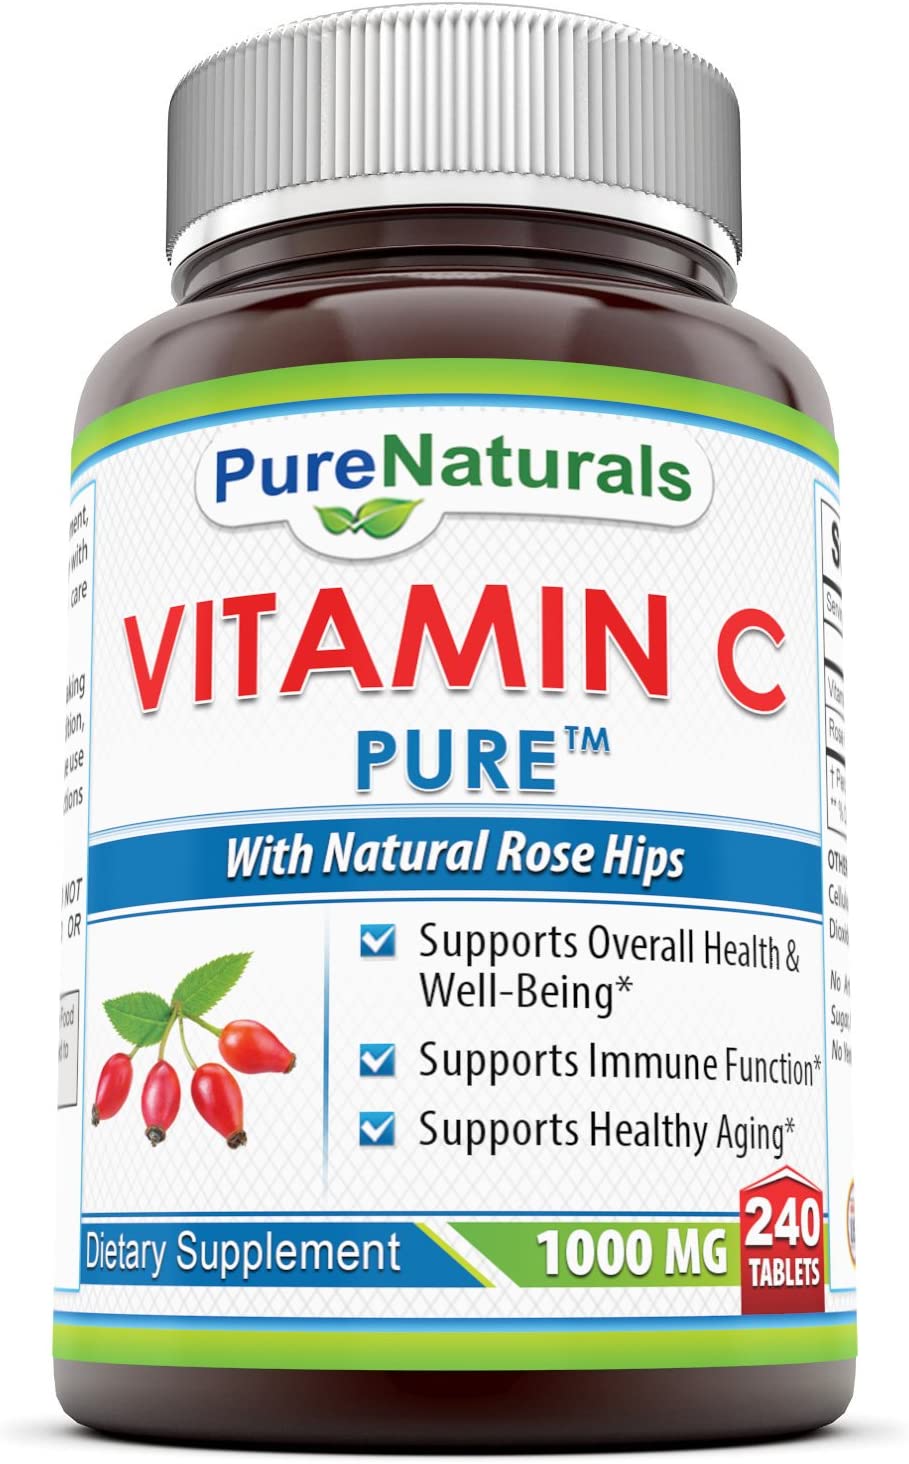 Pure Naturals Vitamin C 1000 mg With Rose Hips, 240-Count